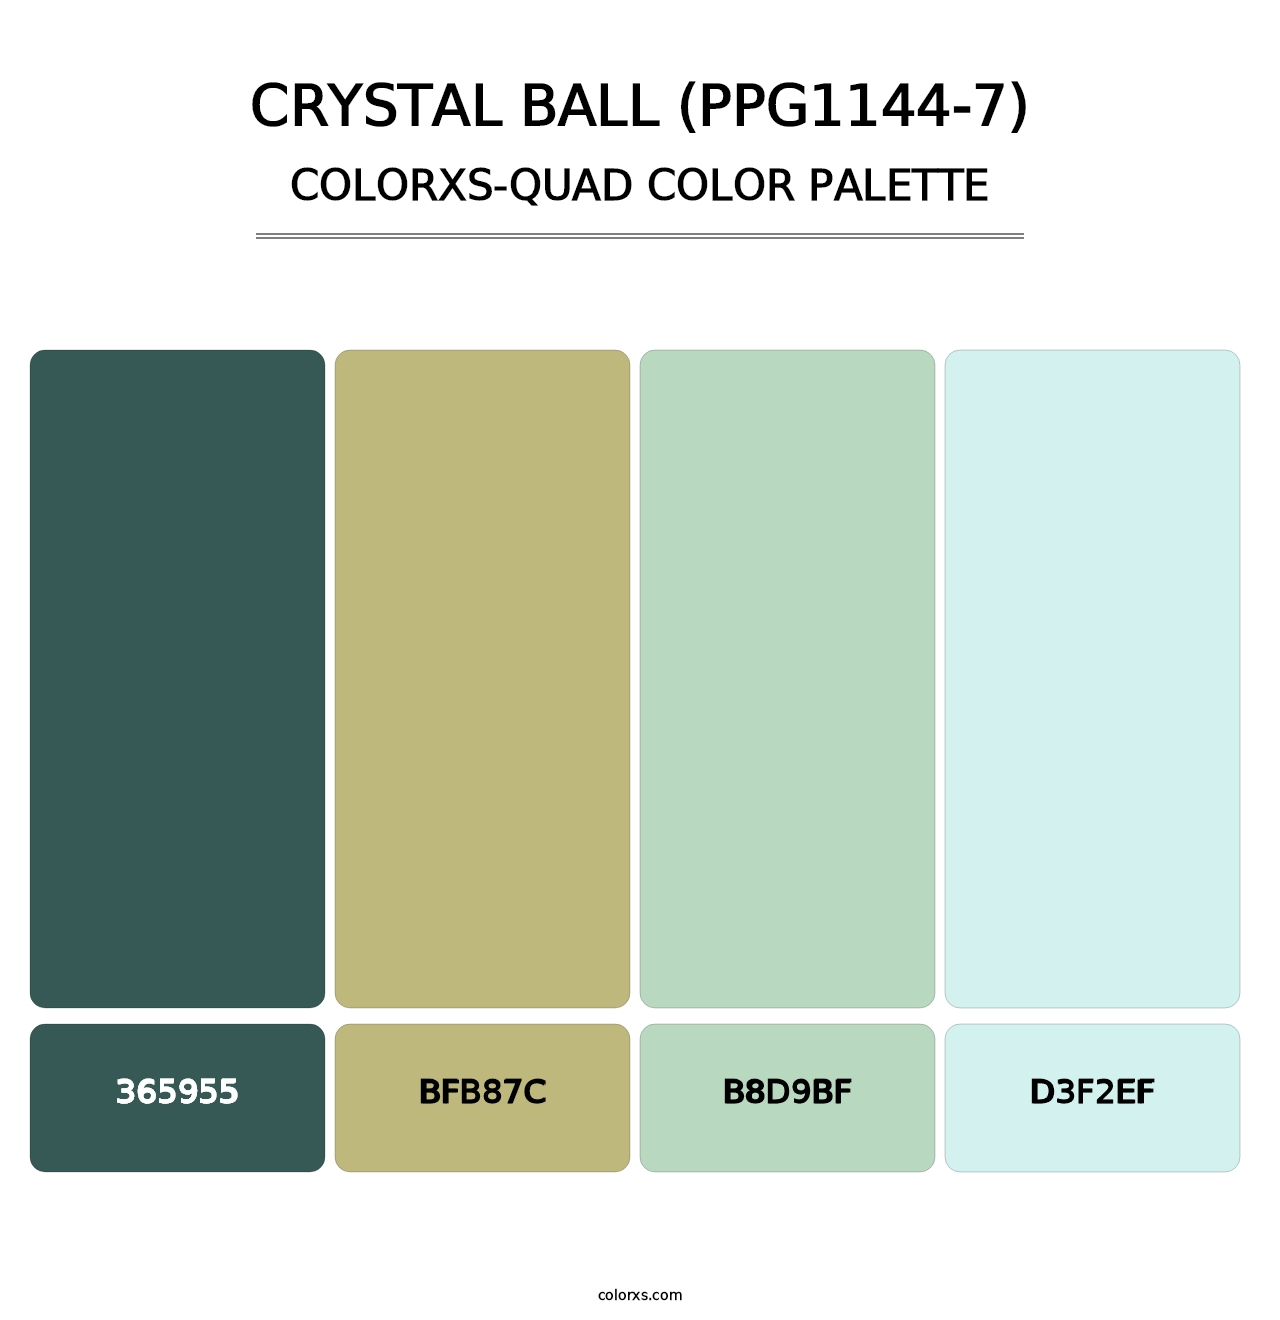 Crystal Ball (PPG1144-7) - Colorxs Quad Palette